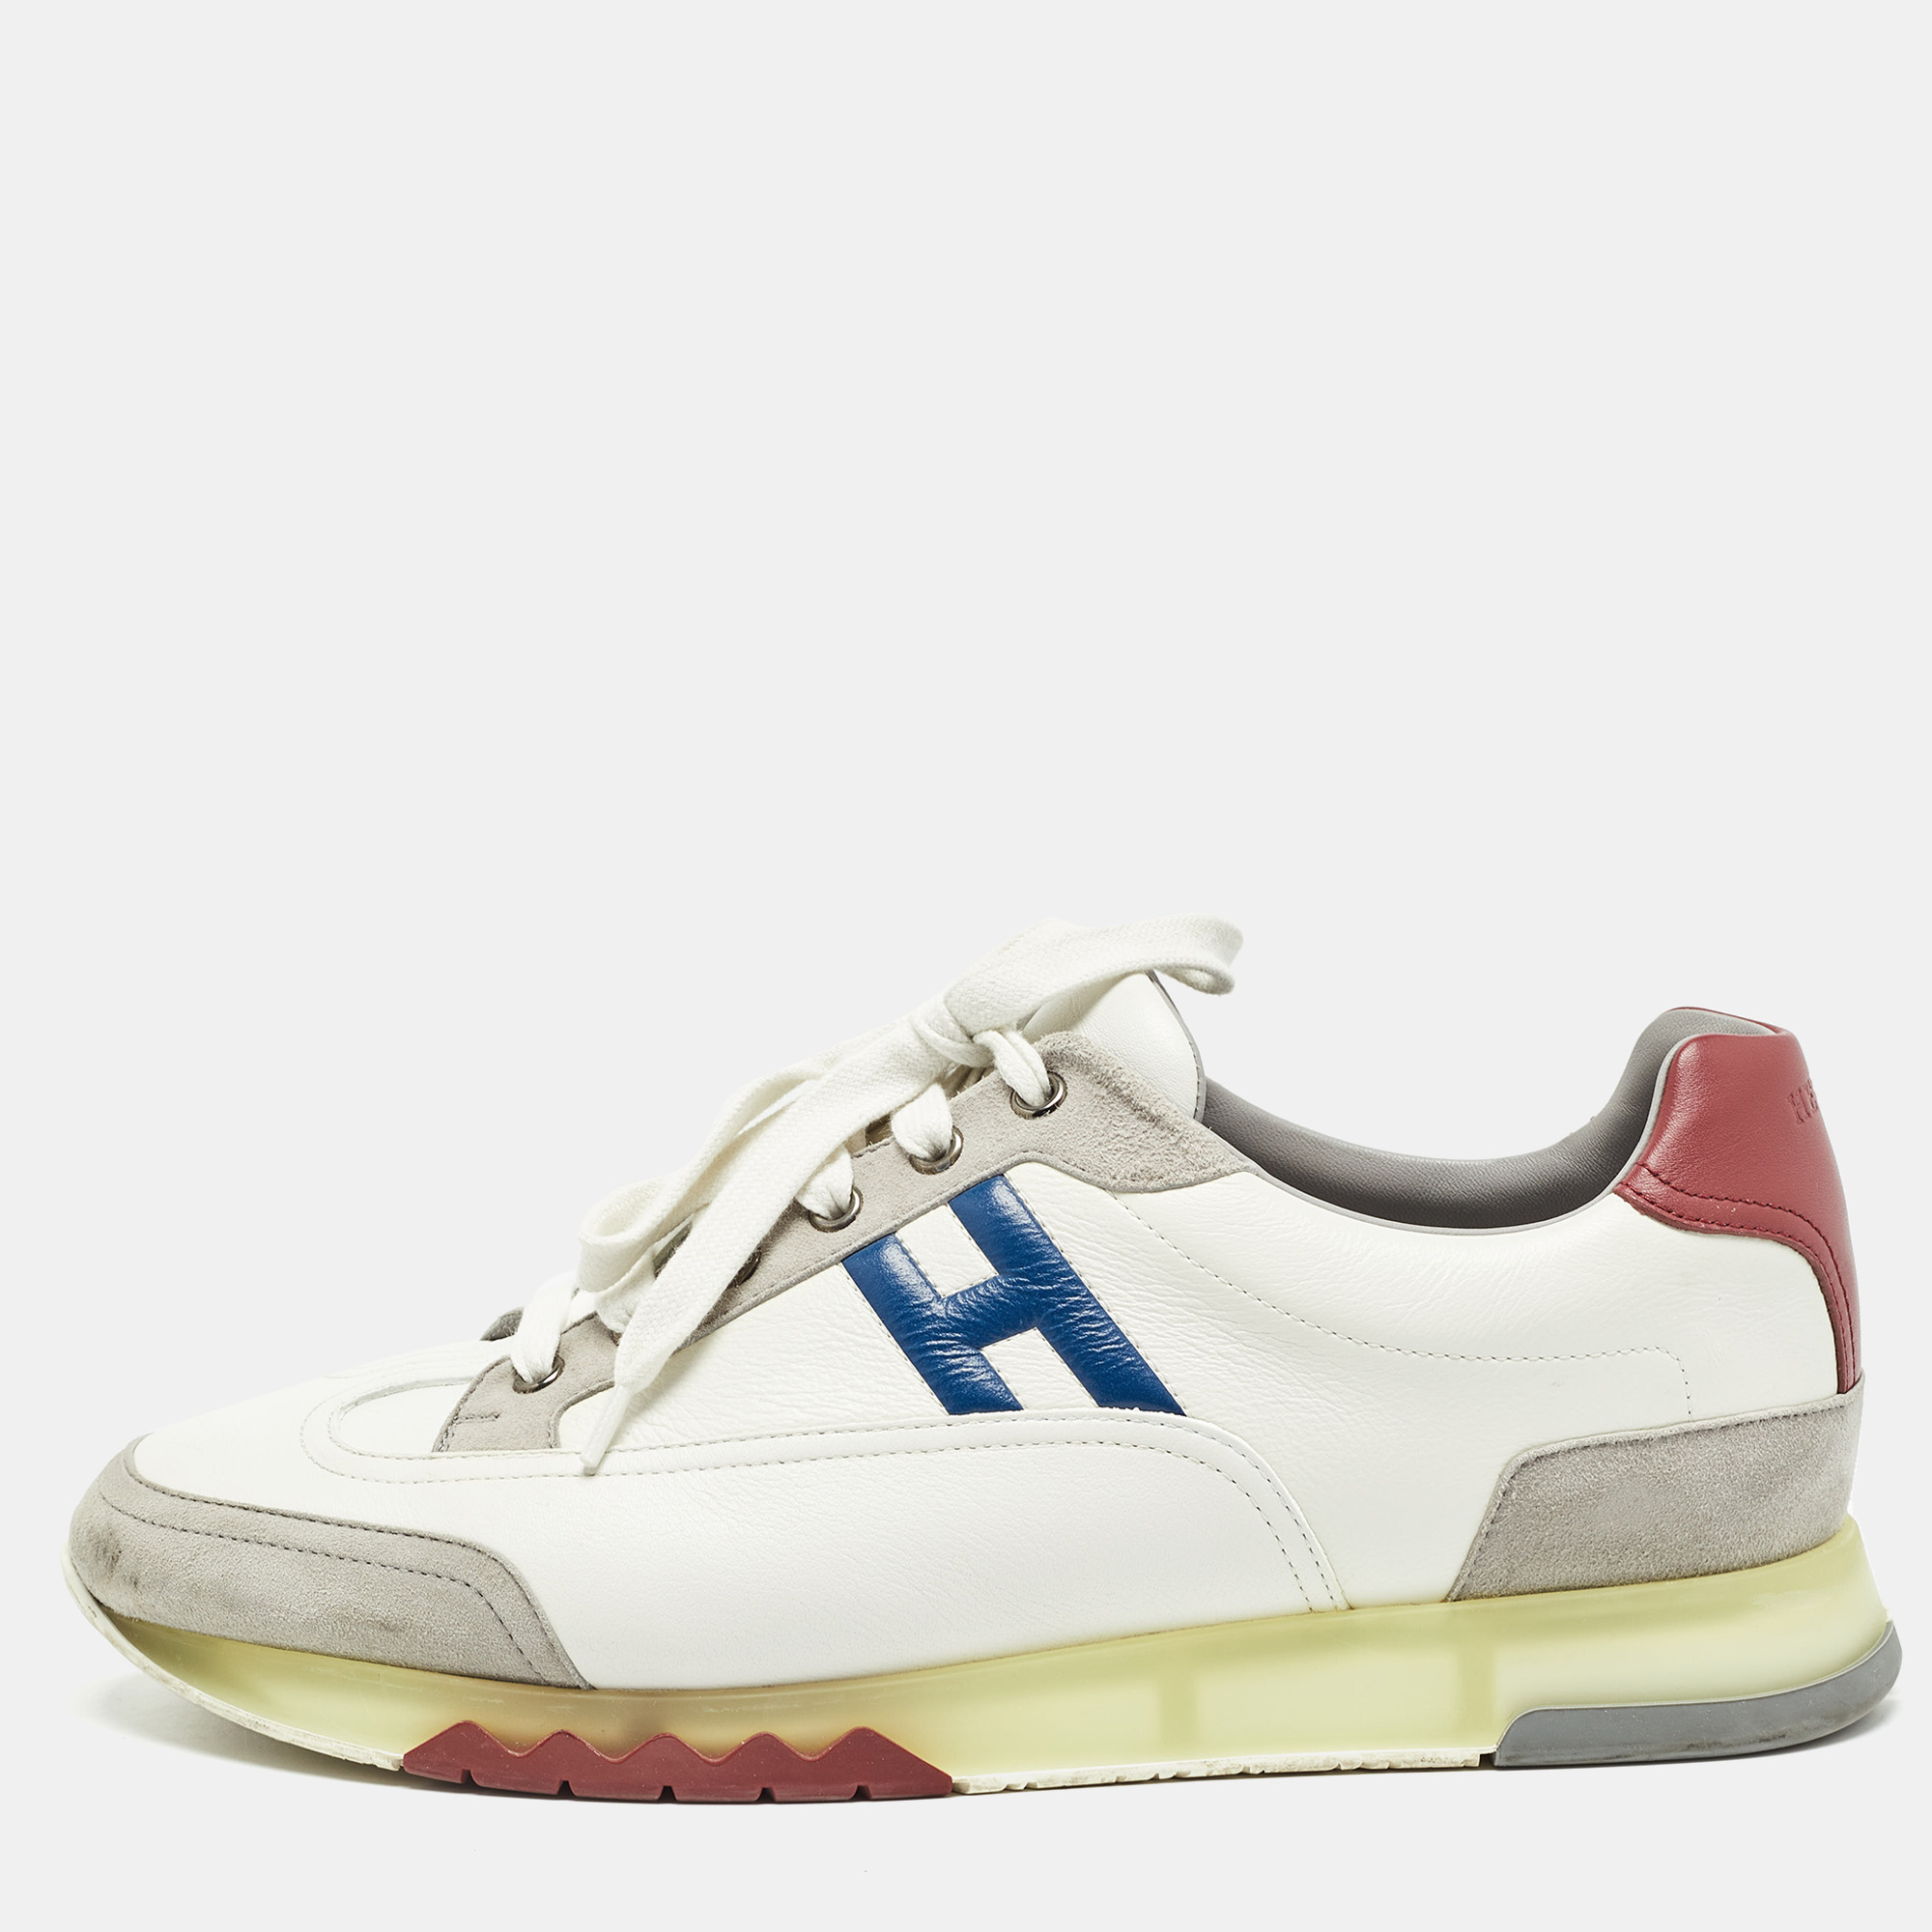 Hermes multicolor leather and suede trail sneakers size 43.5